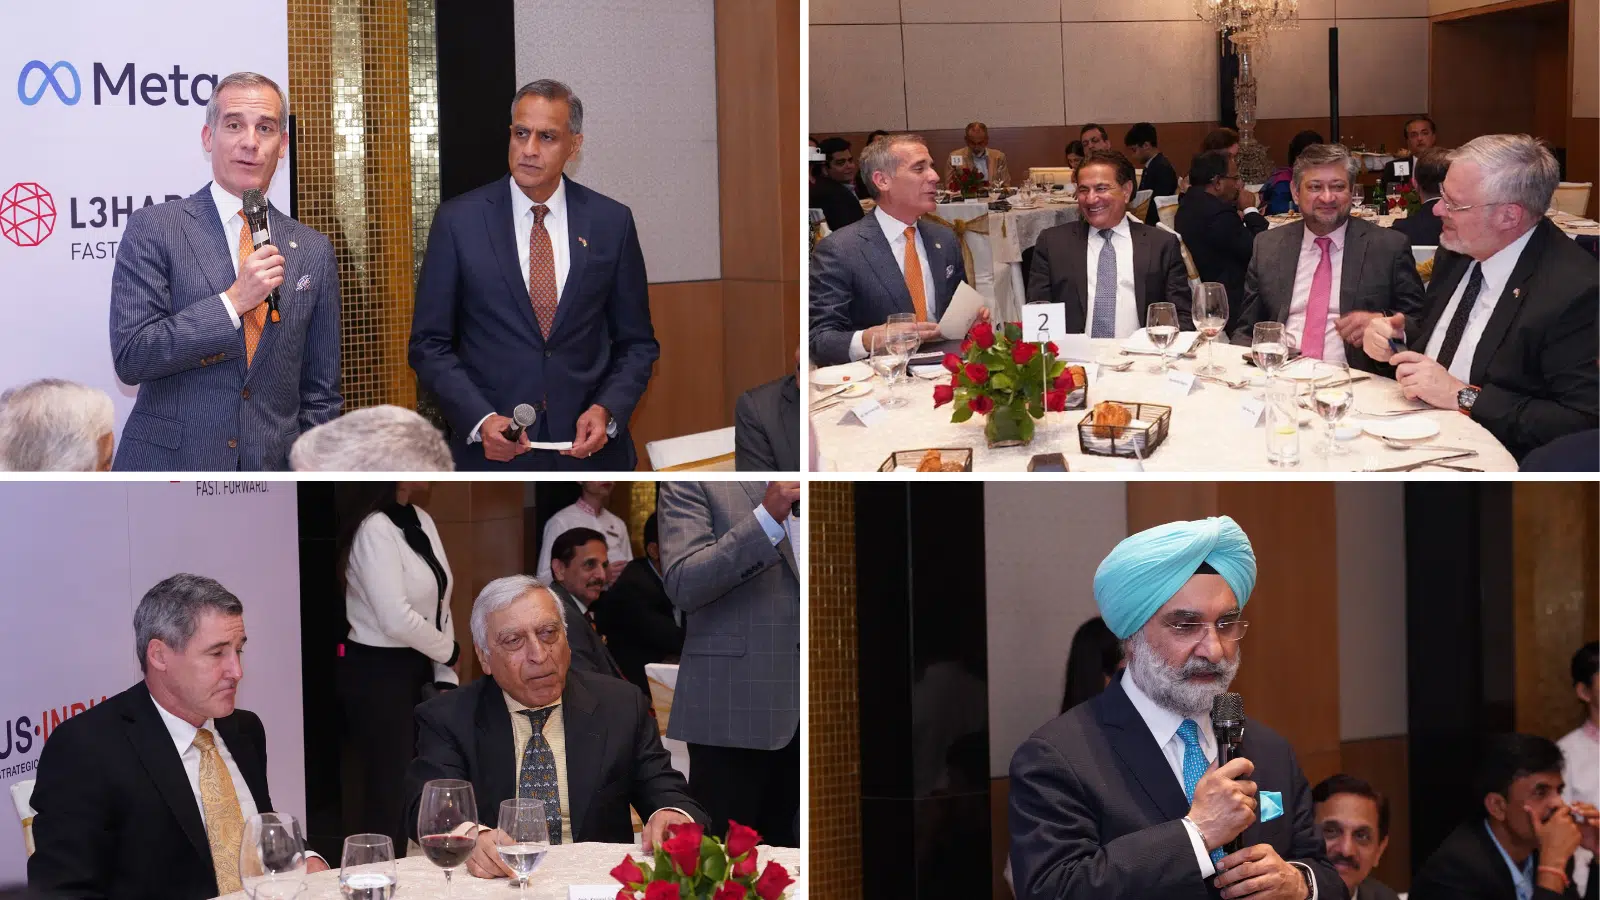 USISPF hosted officials from US and Indian government leaders, captains of industry, former diplomats, board members, and members, who discussed strengthening the strategic partnership and elevating commercial ties in New Delhi